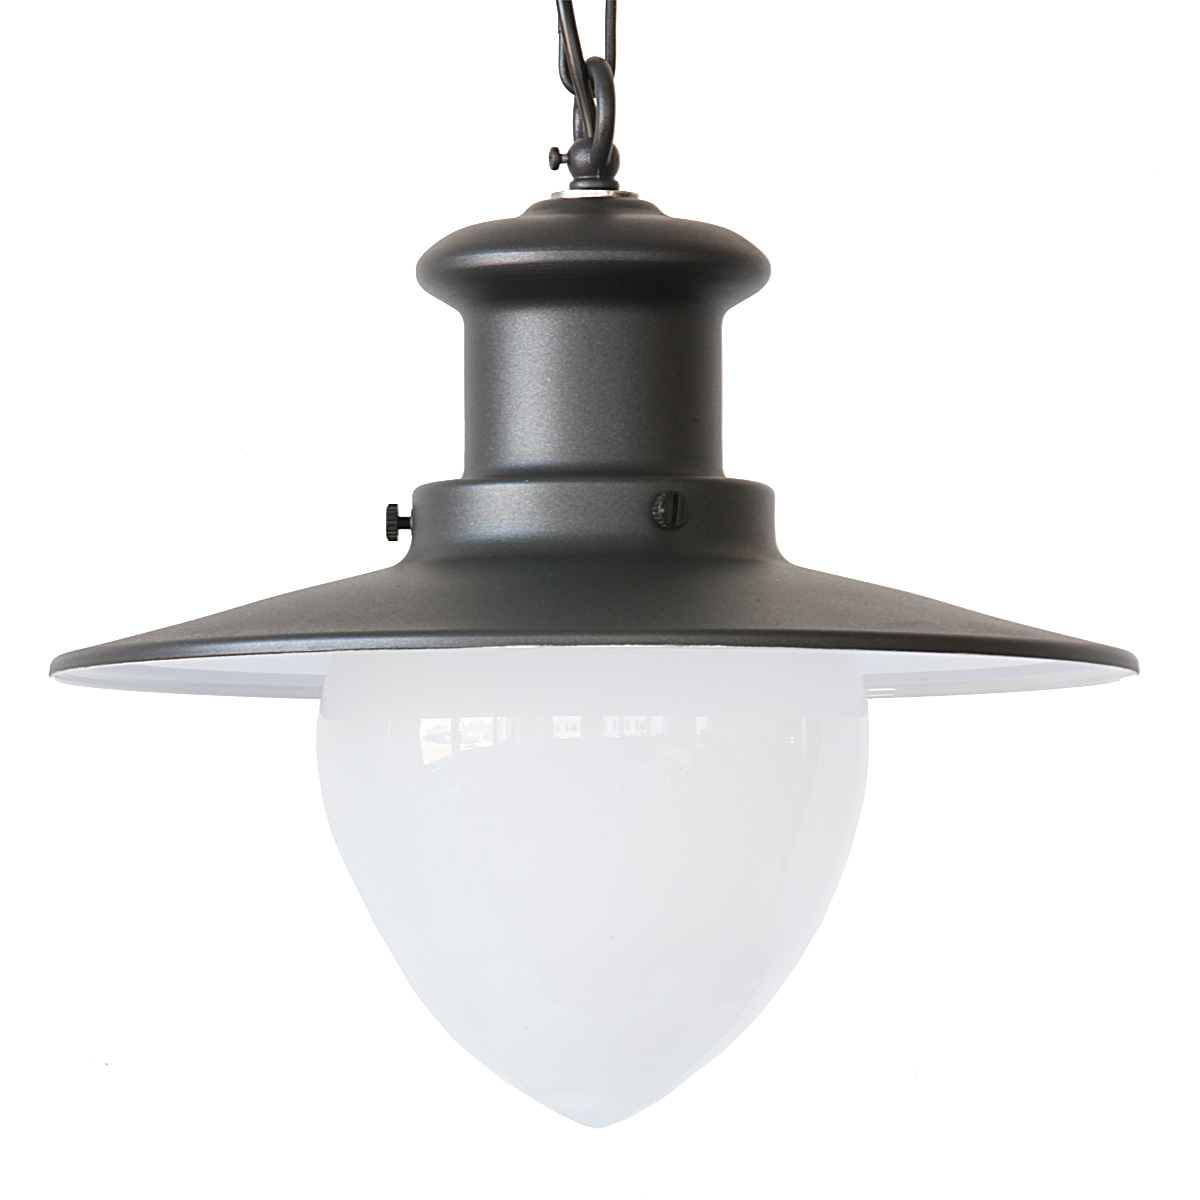 Industrial-style Pendant Light for Outdoors